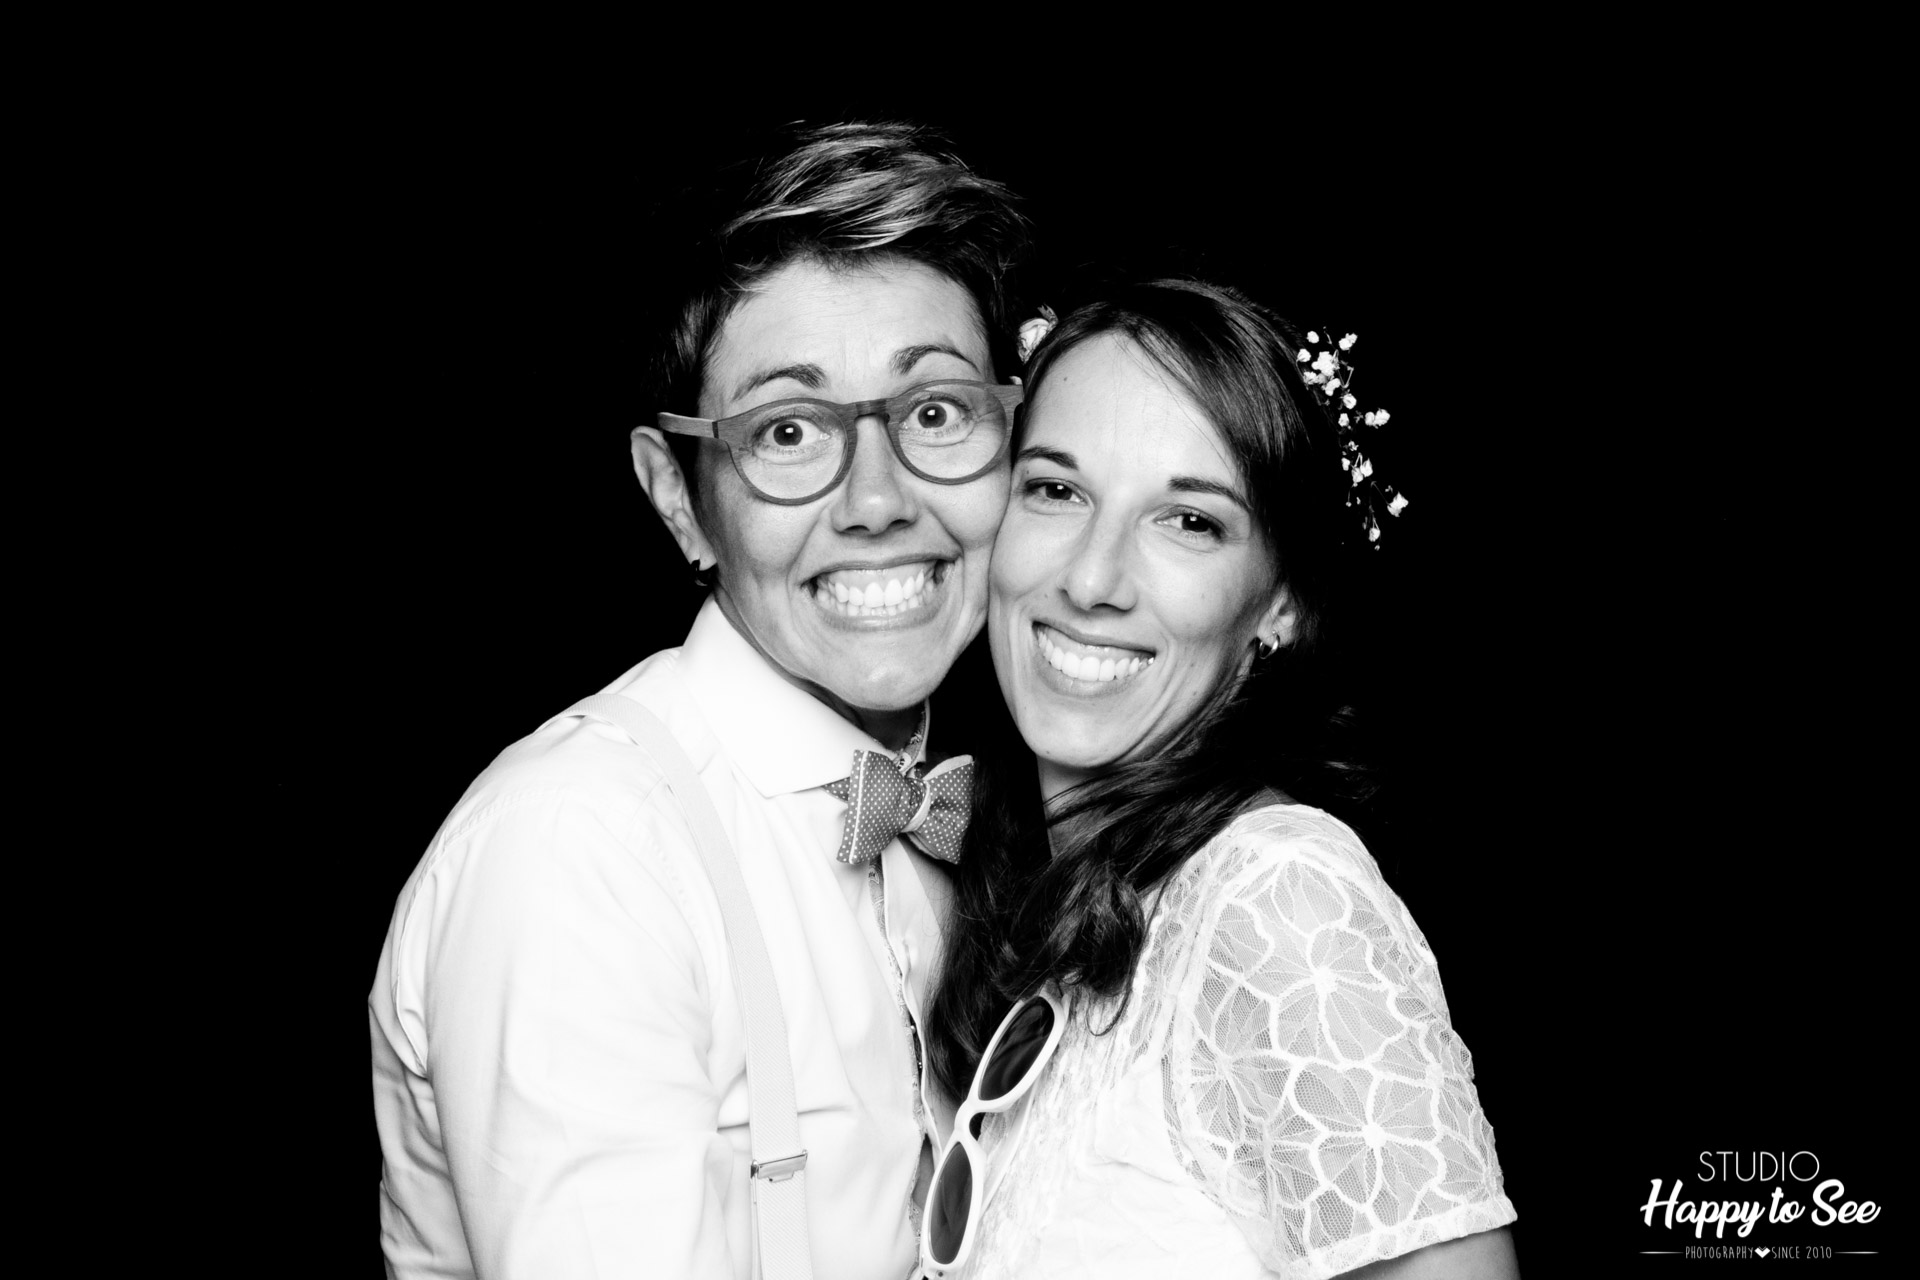 Photobooth Mariage Lesbien